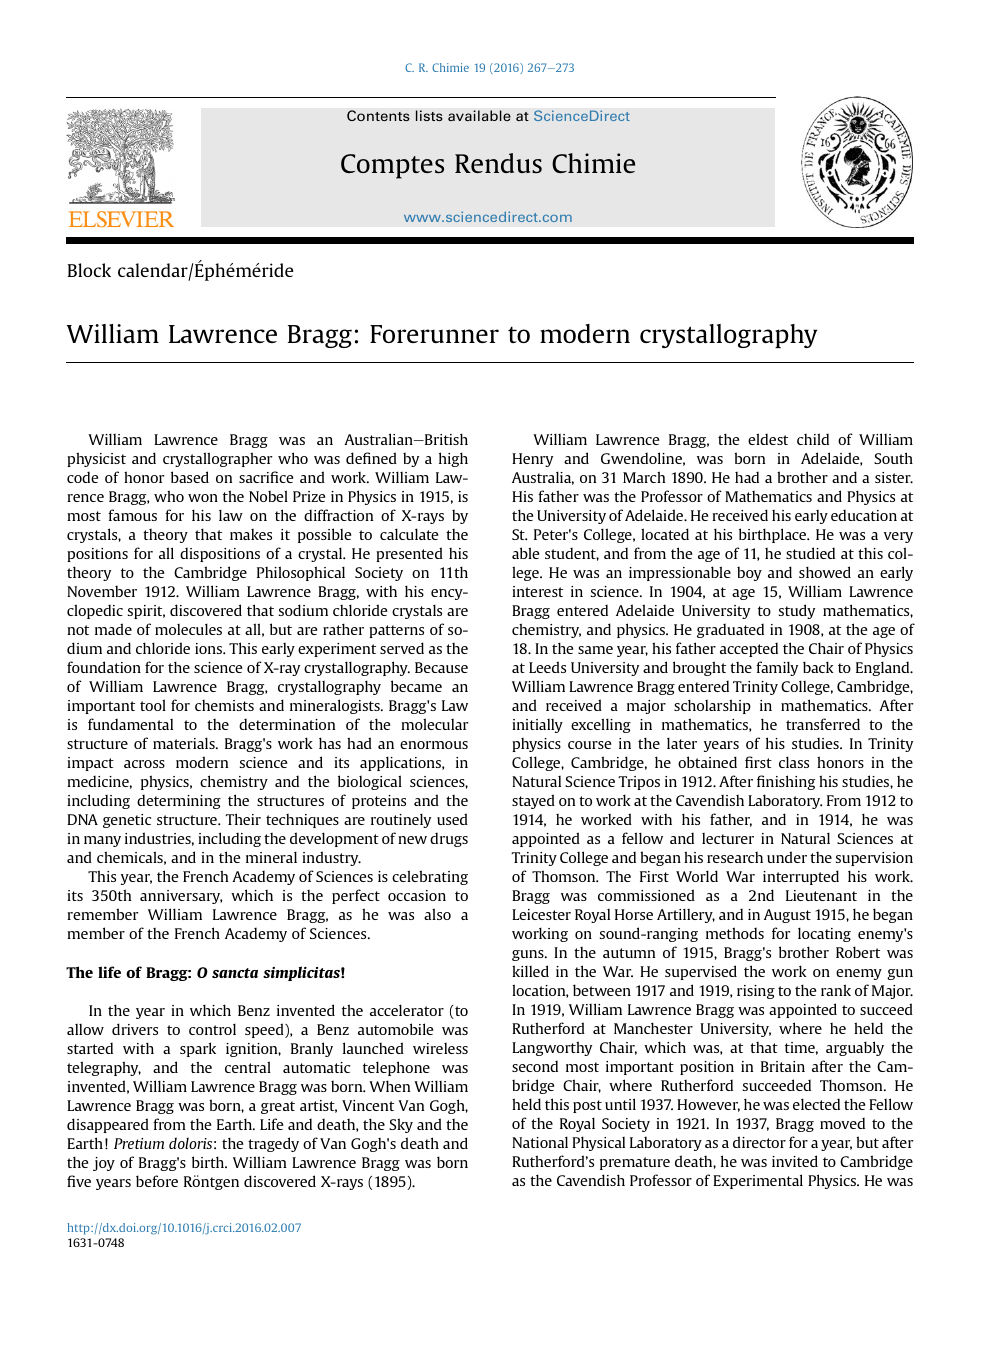 William Lawrence Bragg: Forerunner to modern crystallography – topic of research paper in Media and communications. Download scholarly article PDF and read for free on CyberLeninka science